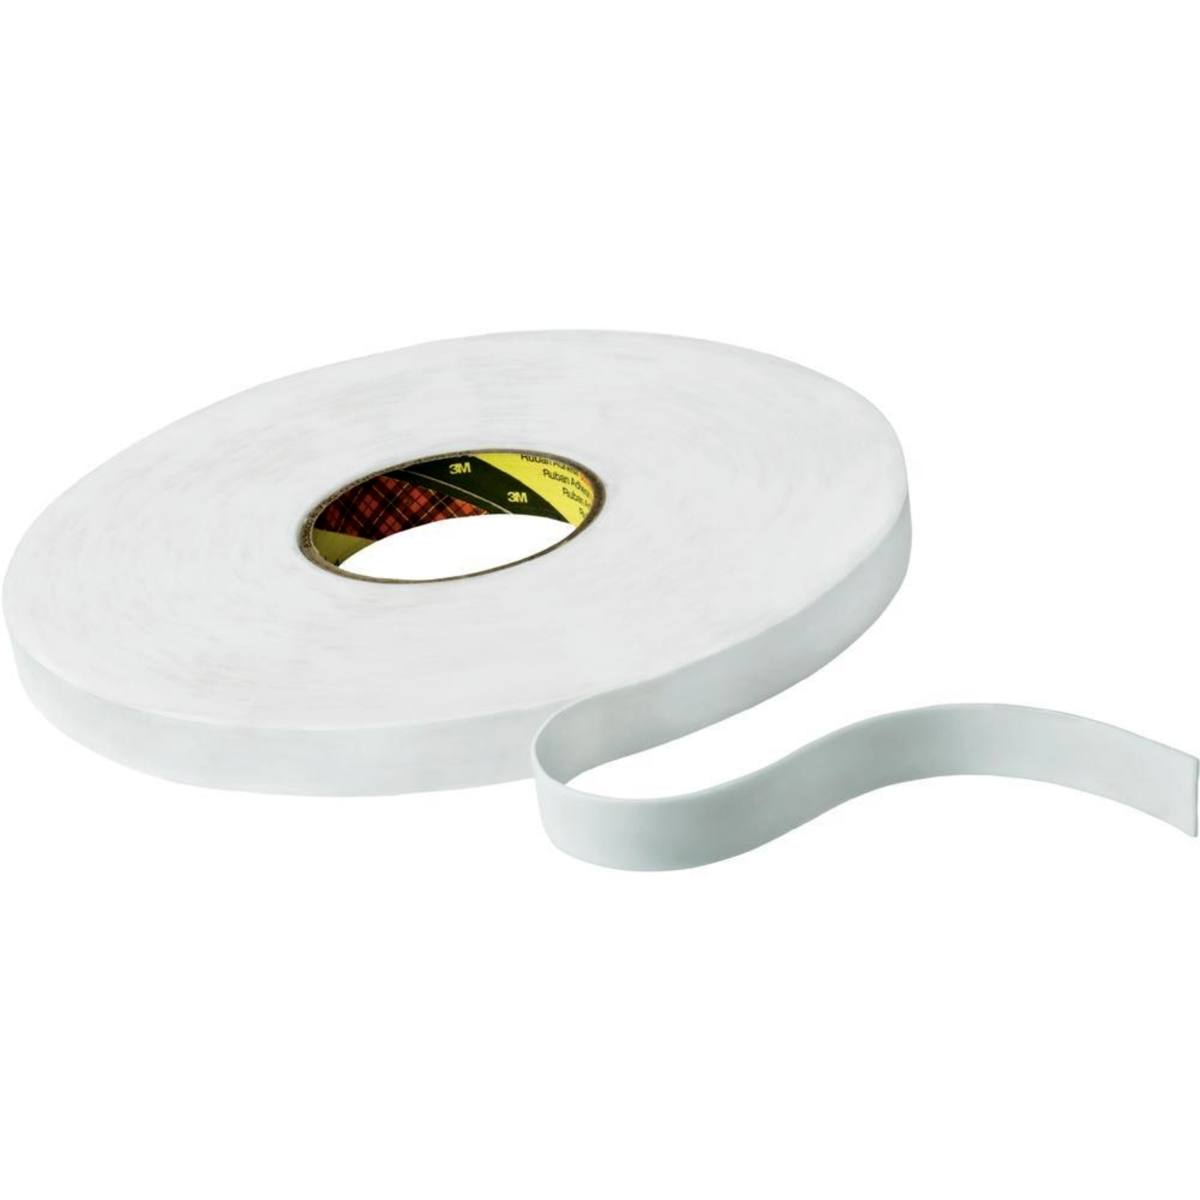 3M PE foam adhesive tape with rubber-resin adhesive 9528, white, 15 mm x 66 m, 0.8 mm